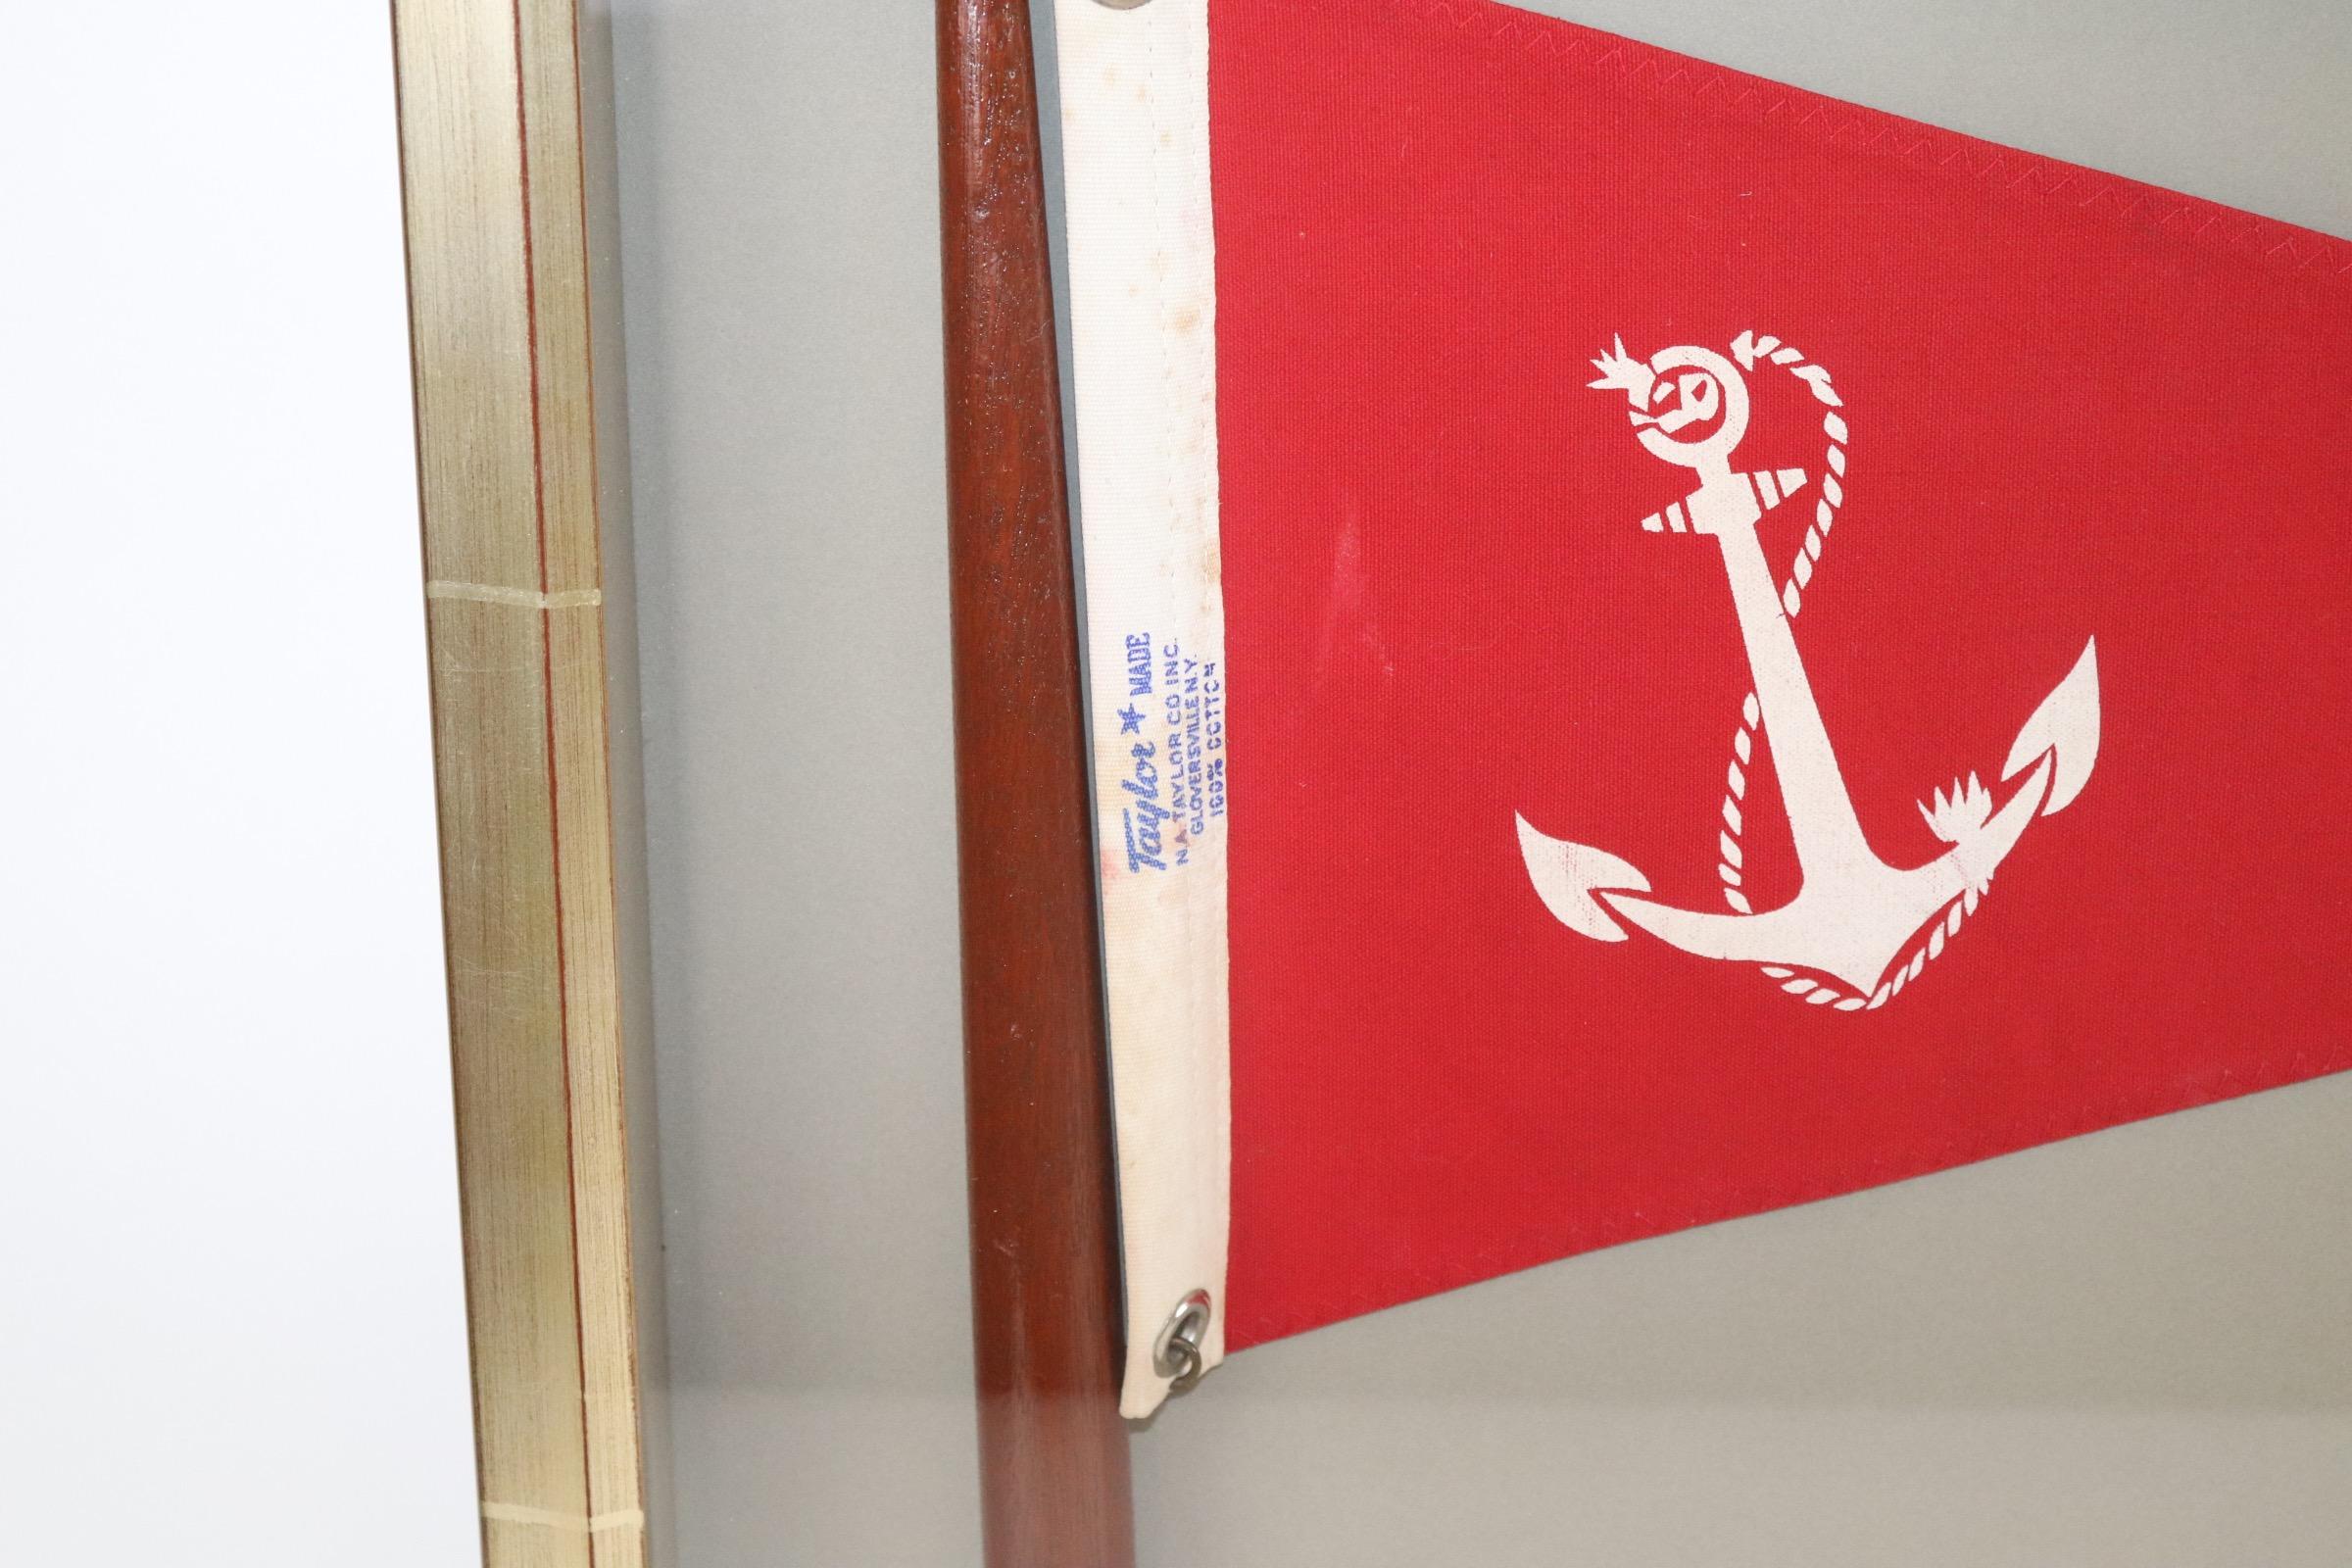 Framed nautical pennant on mast with a red field and white fouled anchor by Taylor. Fitted to a custom shadow box. Weight is 9 pounds.